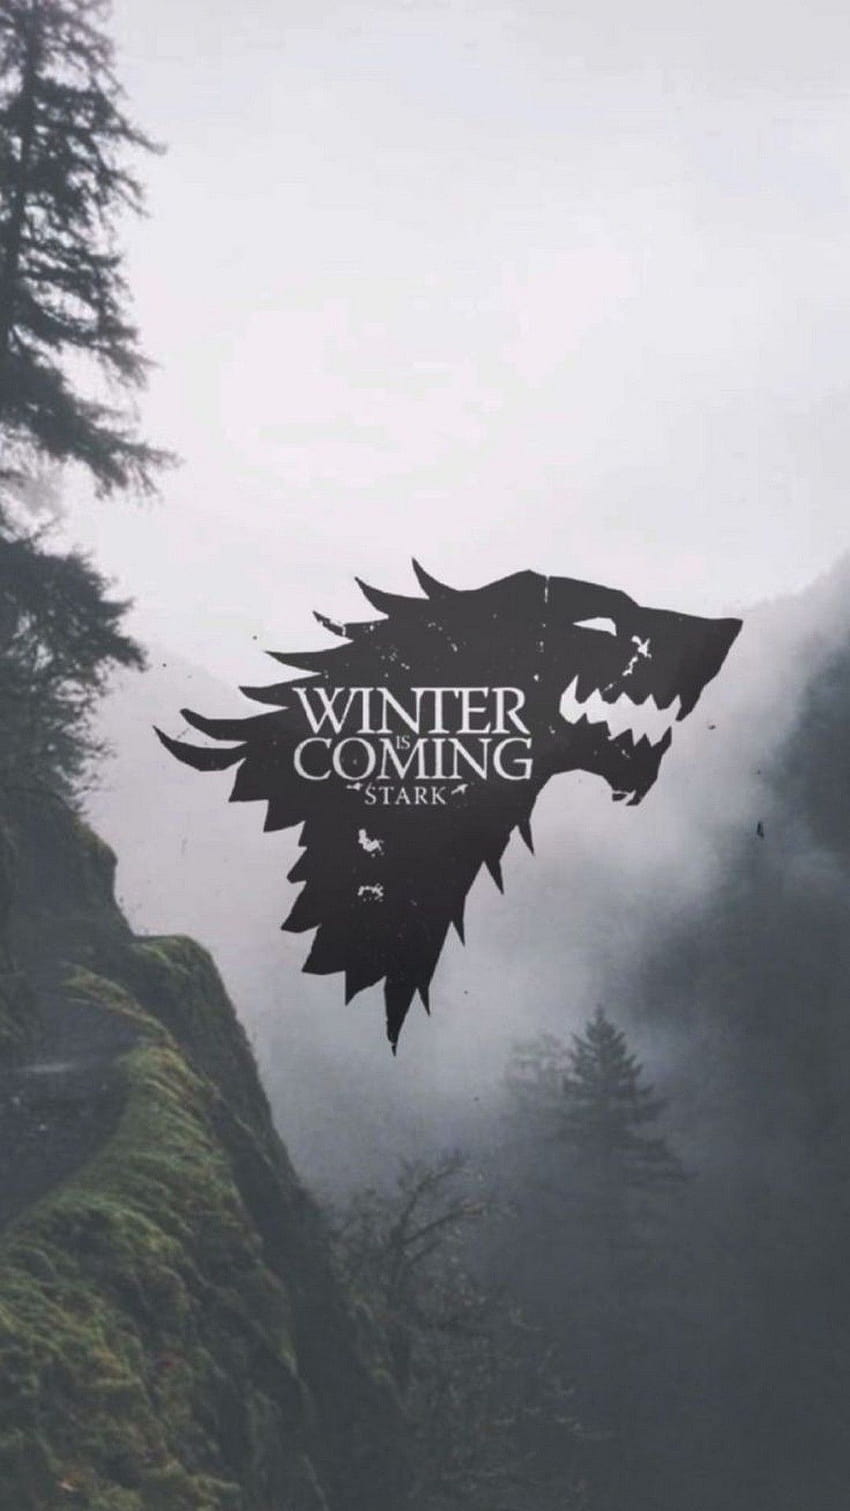 No Spoilers Created this big collection of GoT PostersMobile Wallpapers  OC  Imgur  Game of thrones artwork Game of thrones art Game of thrones  poster